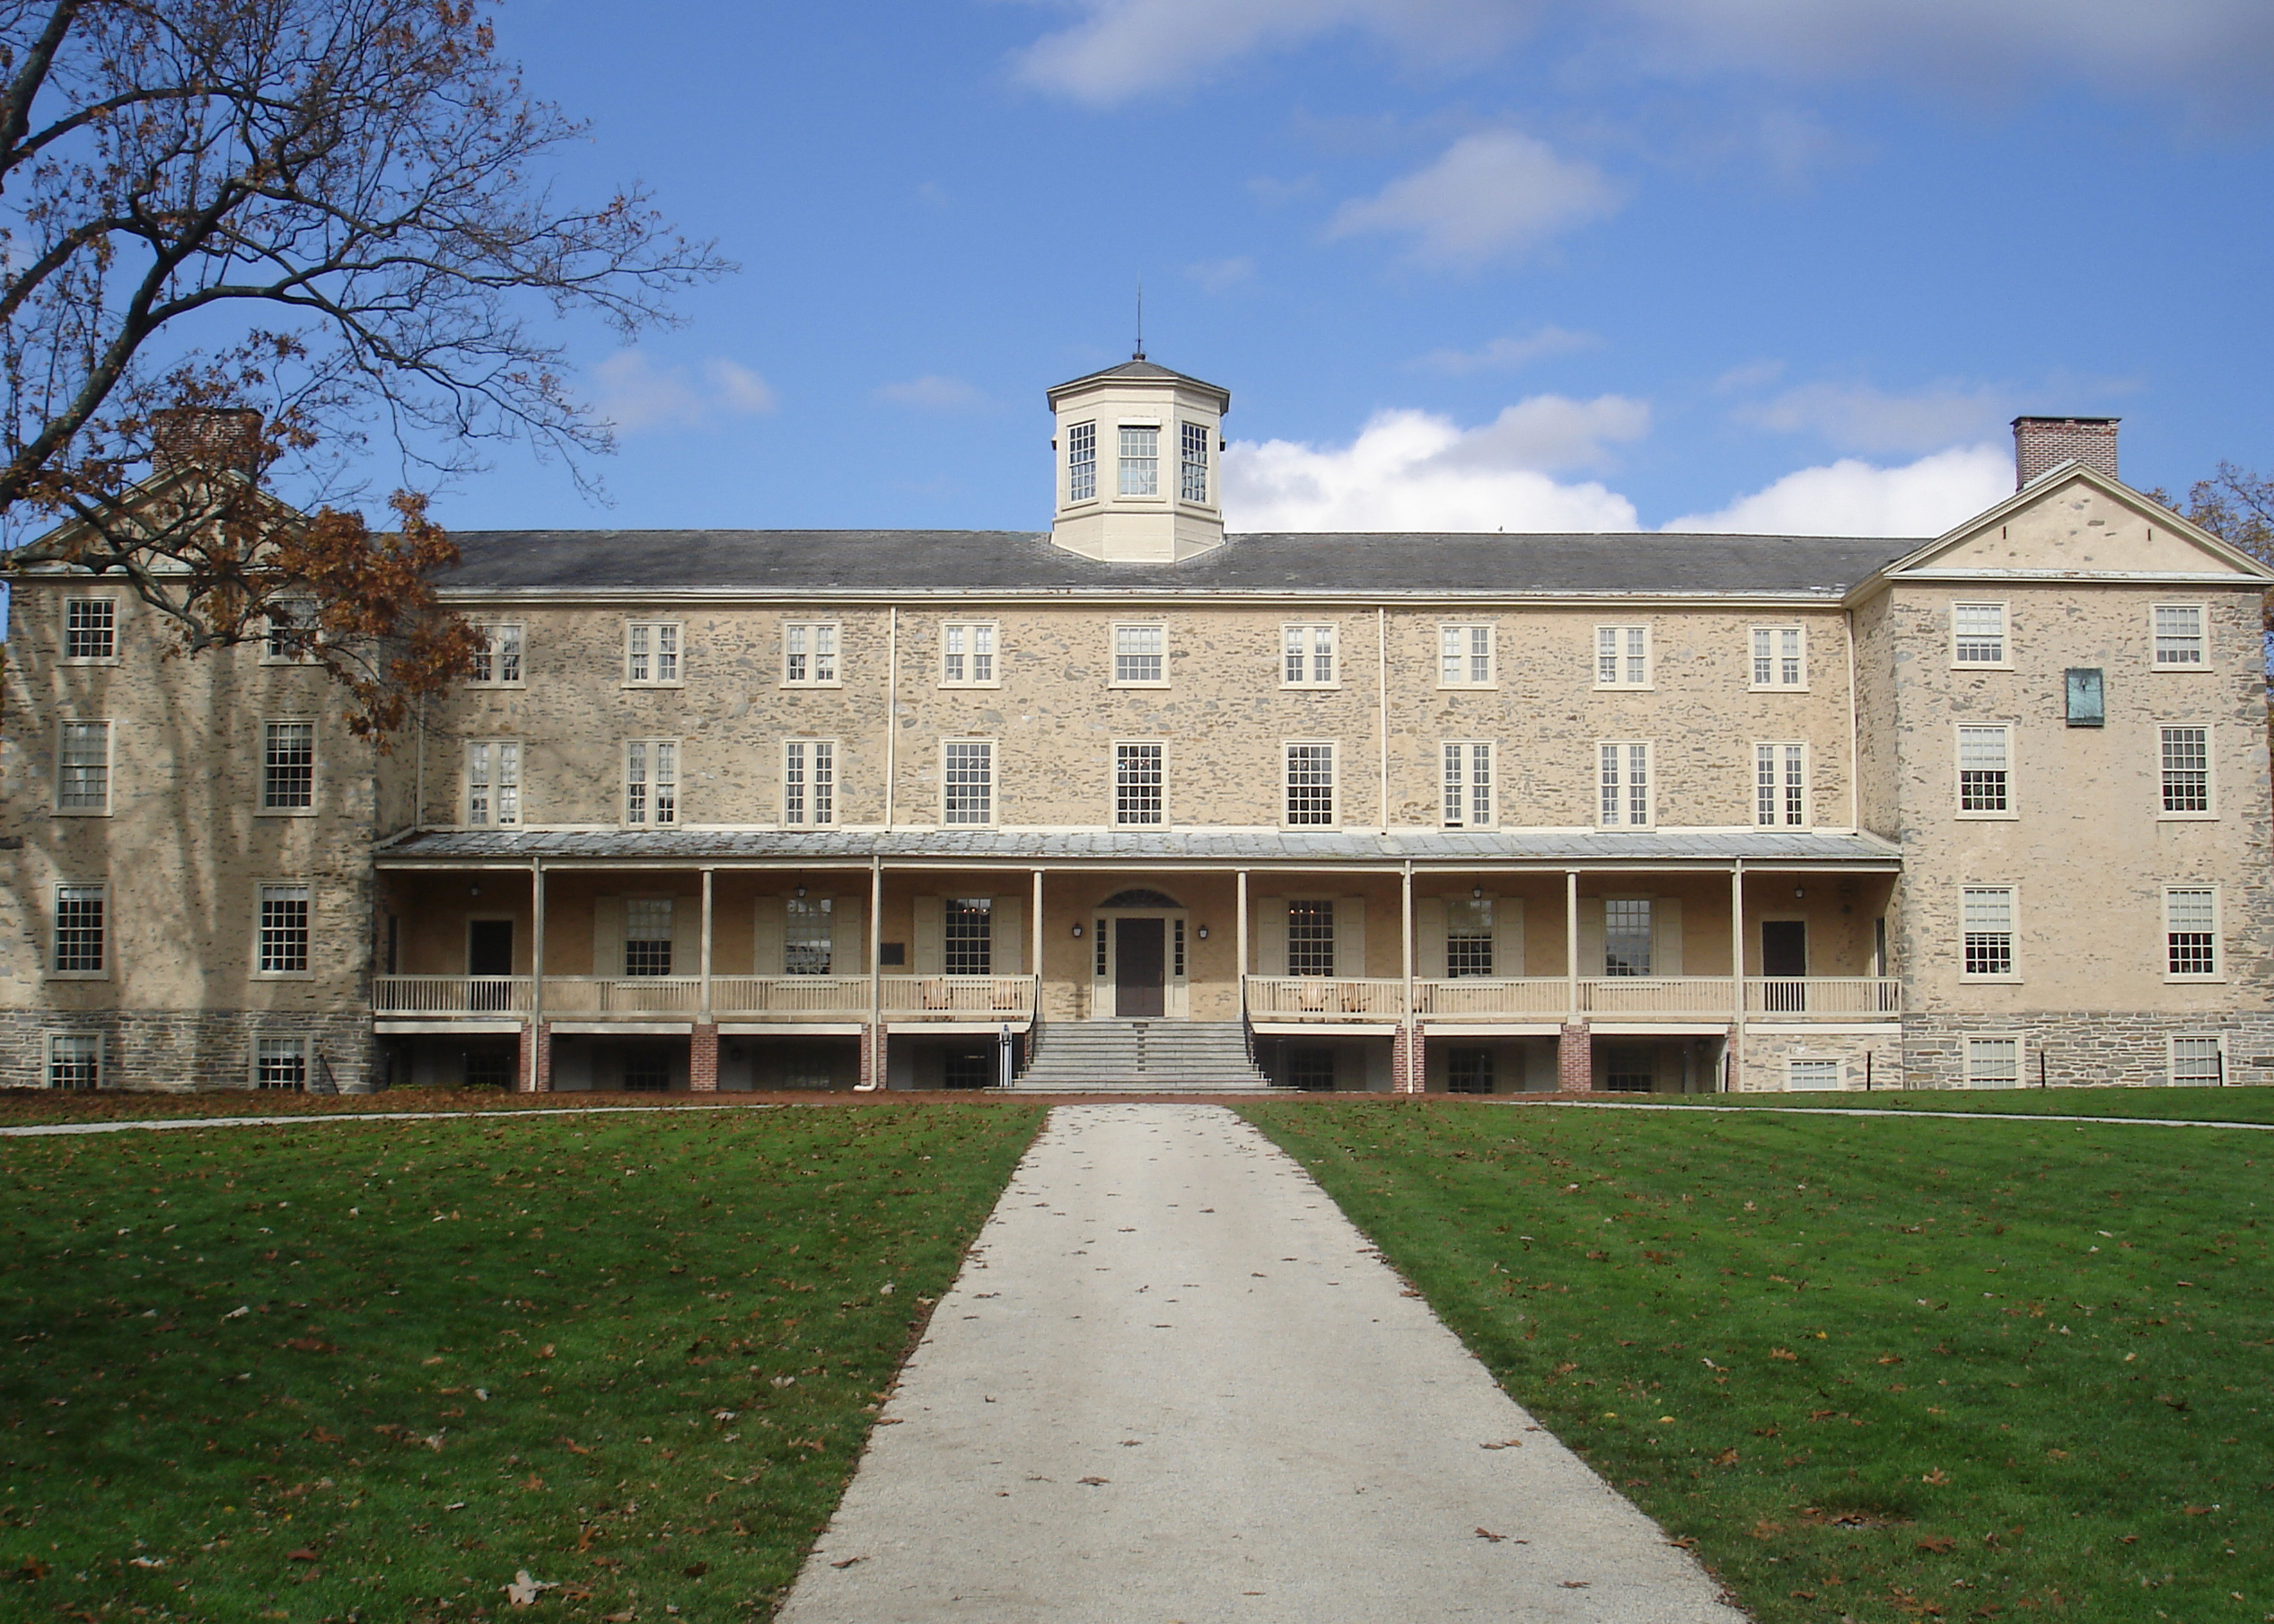 Following the Footsteps of Bryn Mawr: Addressing Haverford’s History